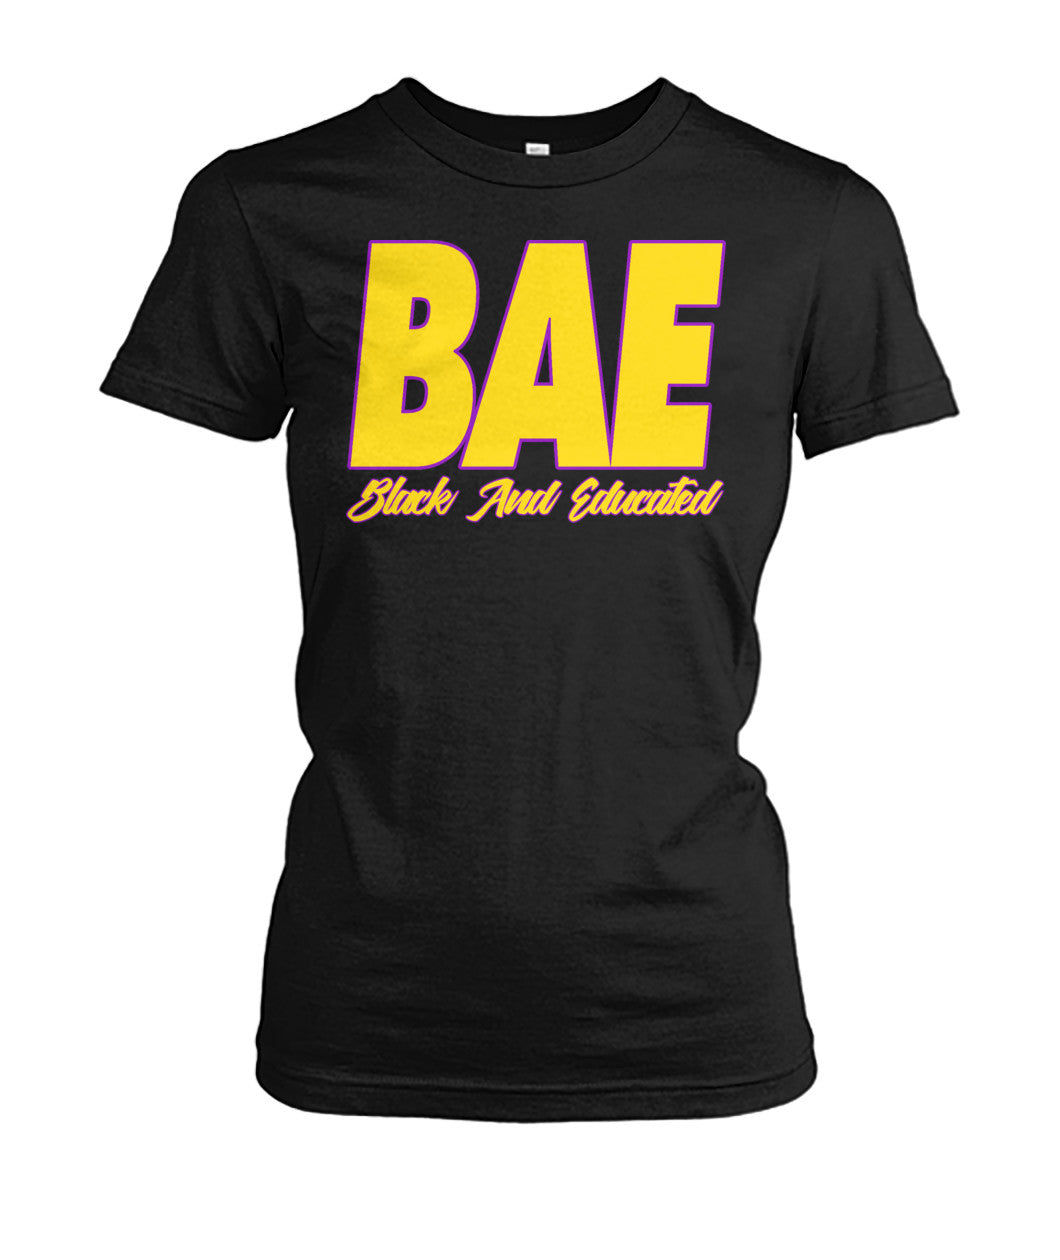 Black and Educated- PV Edition Women's Crew Tee